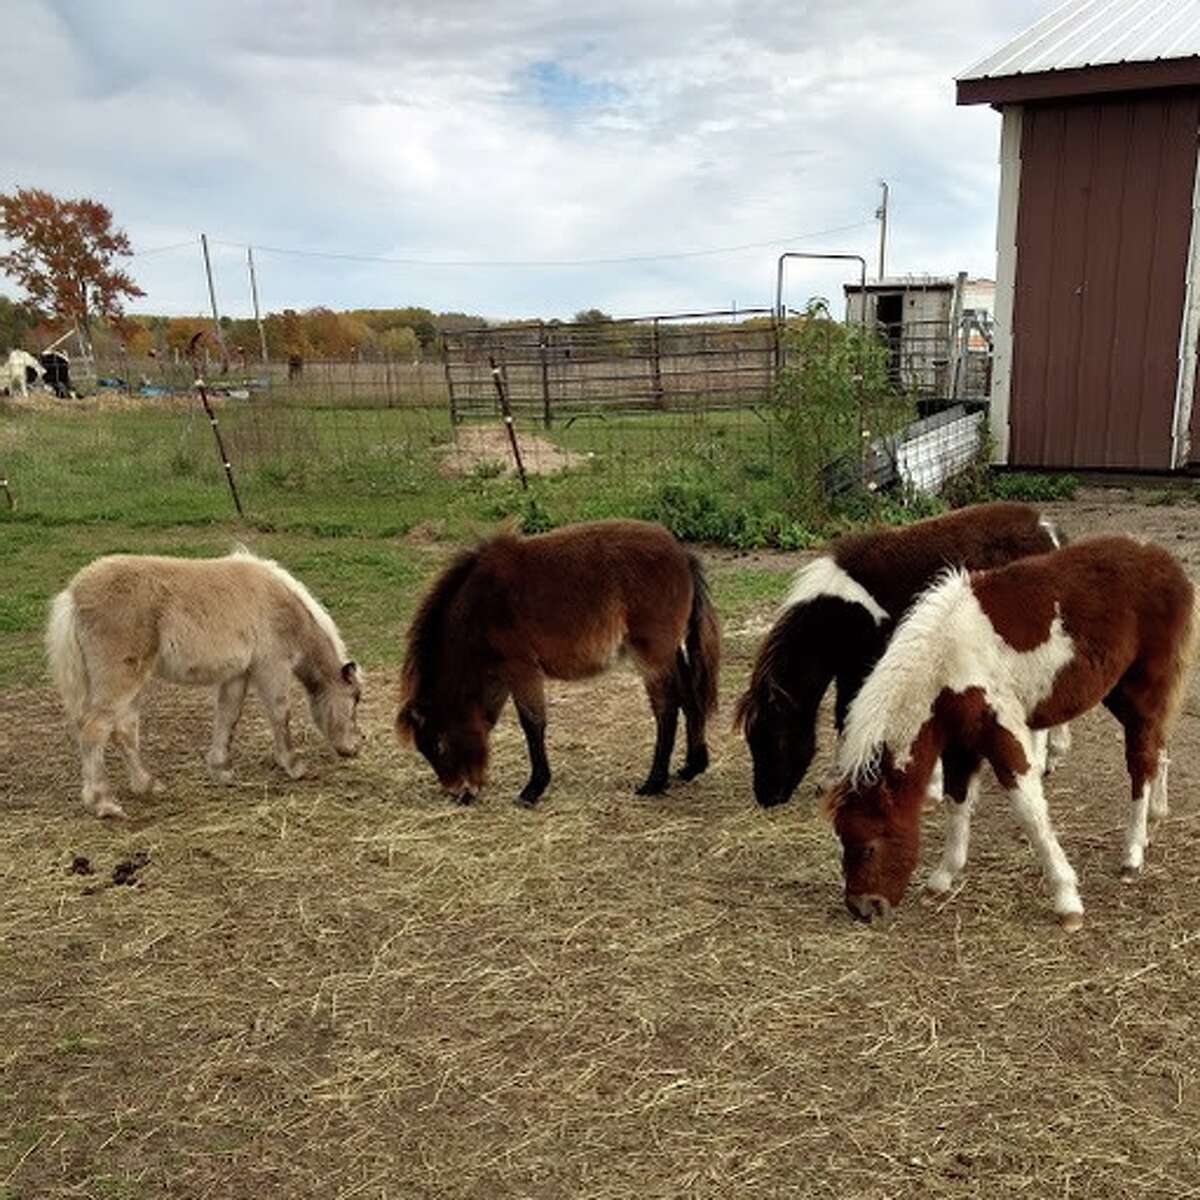 Premier Farms is a pony farm that has been operating in Hersey village for almost the last 30 years.